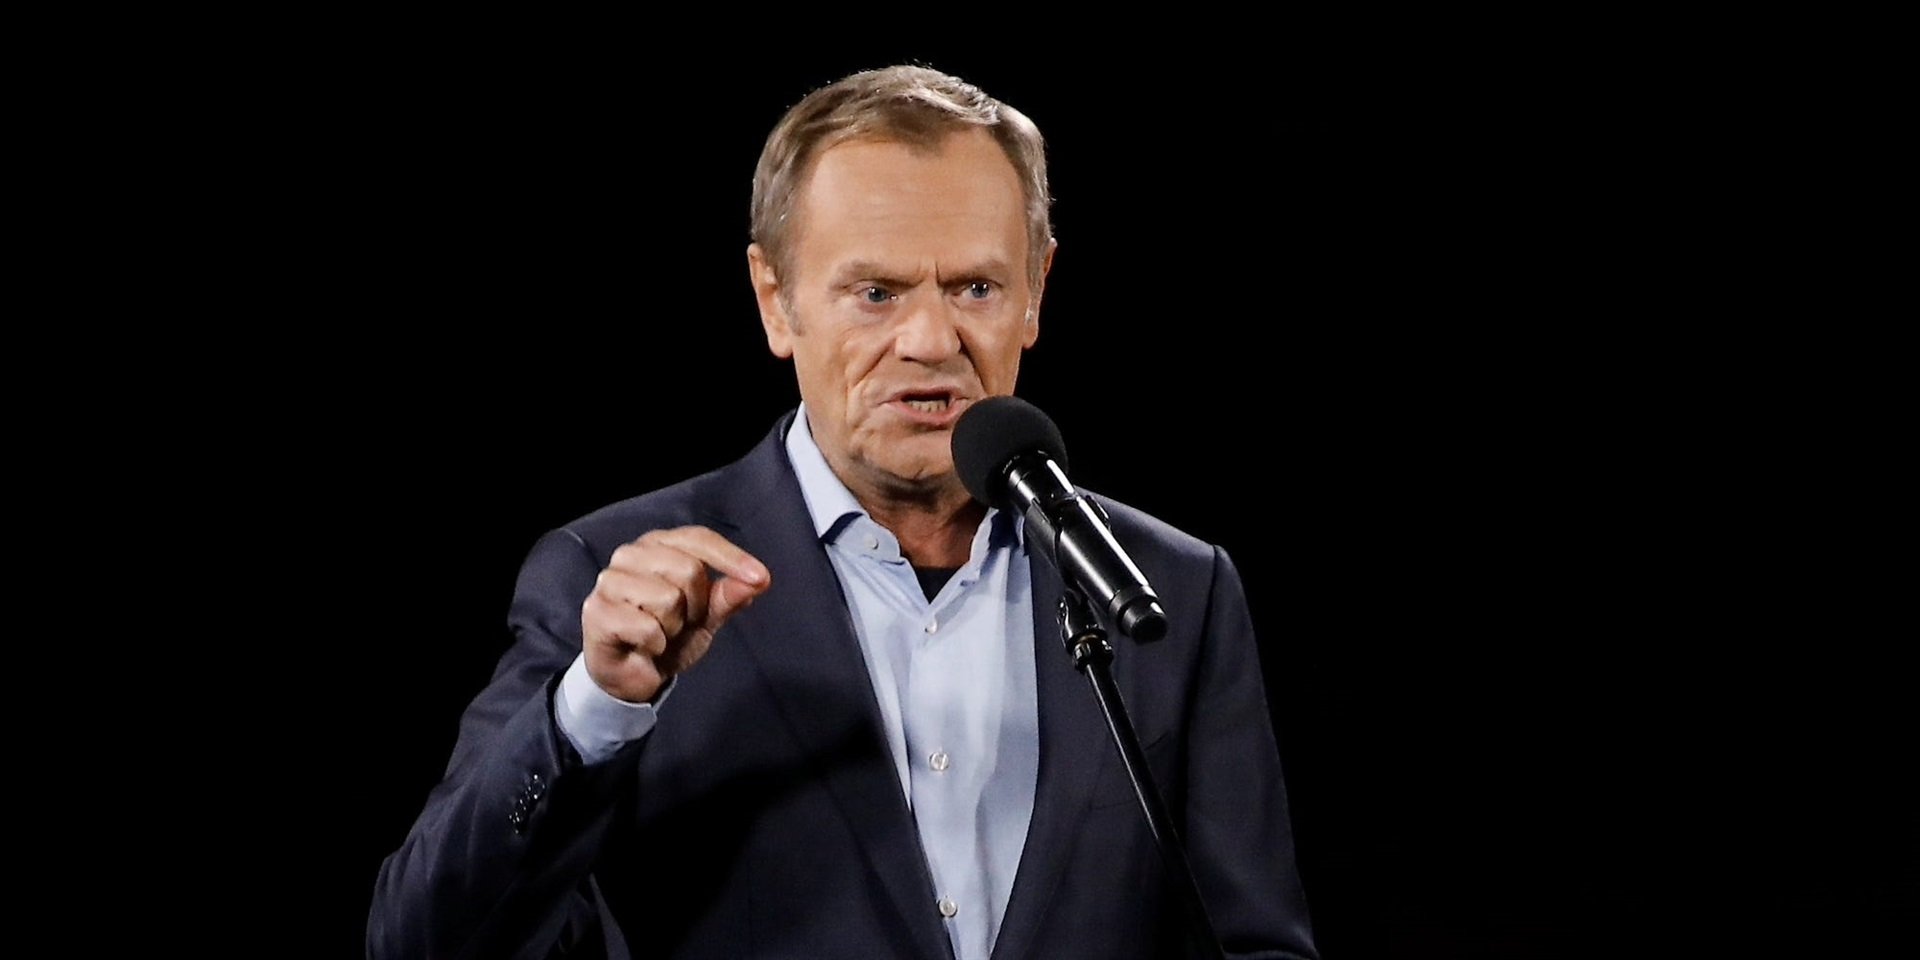 Donald Tusk speaking at a rally in 2021. (Kacper Pempel/Reuters)